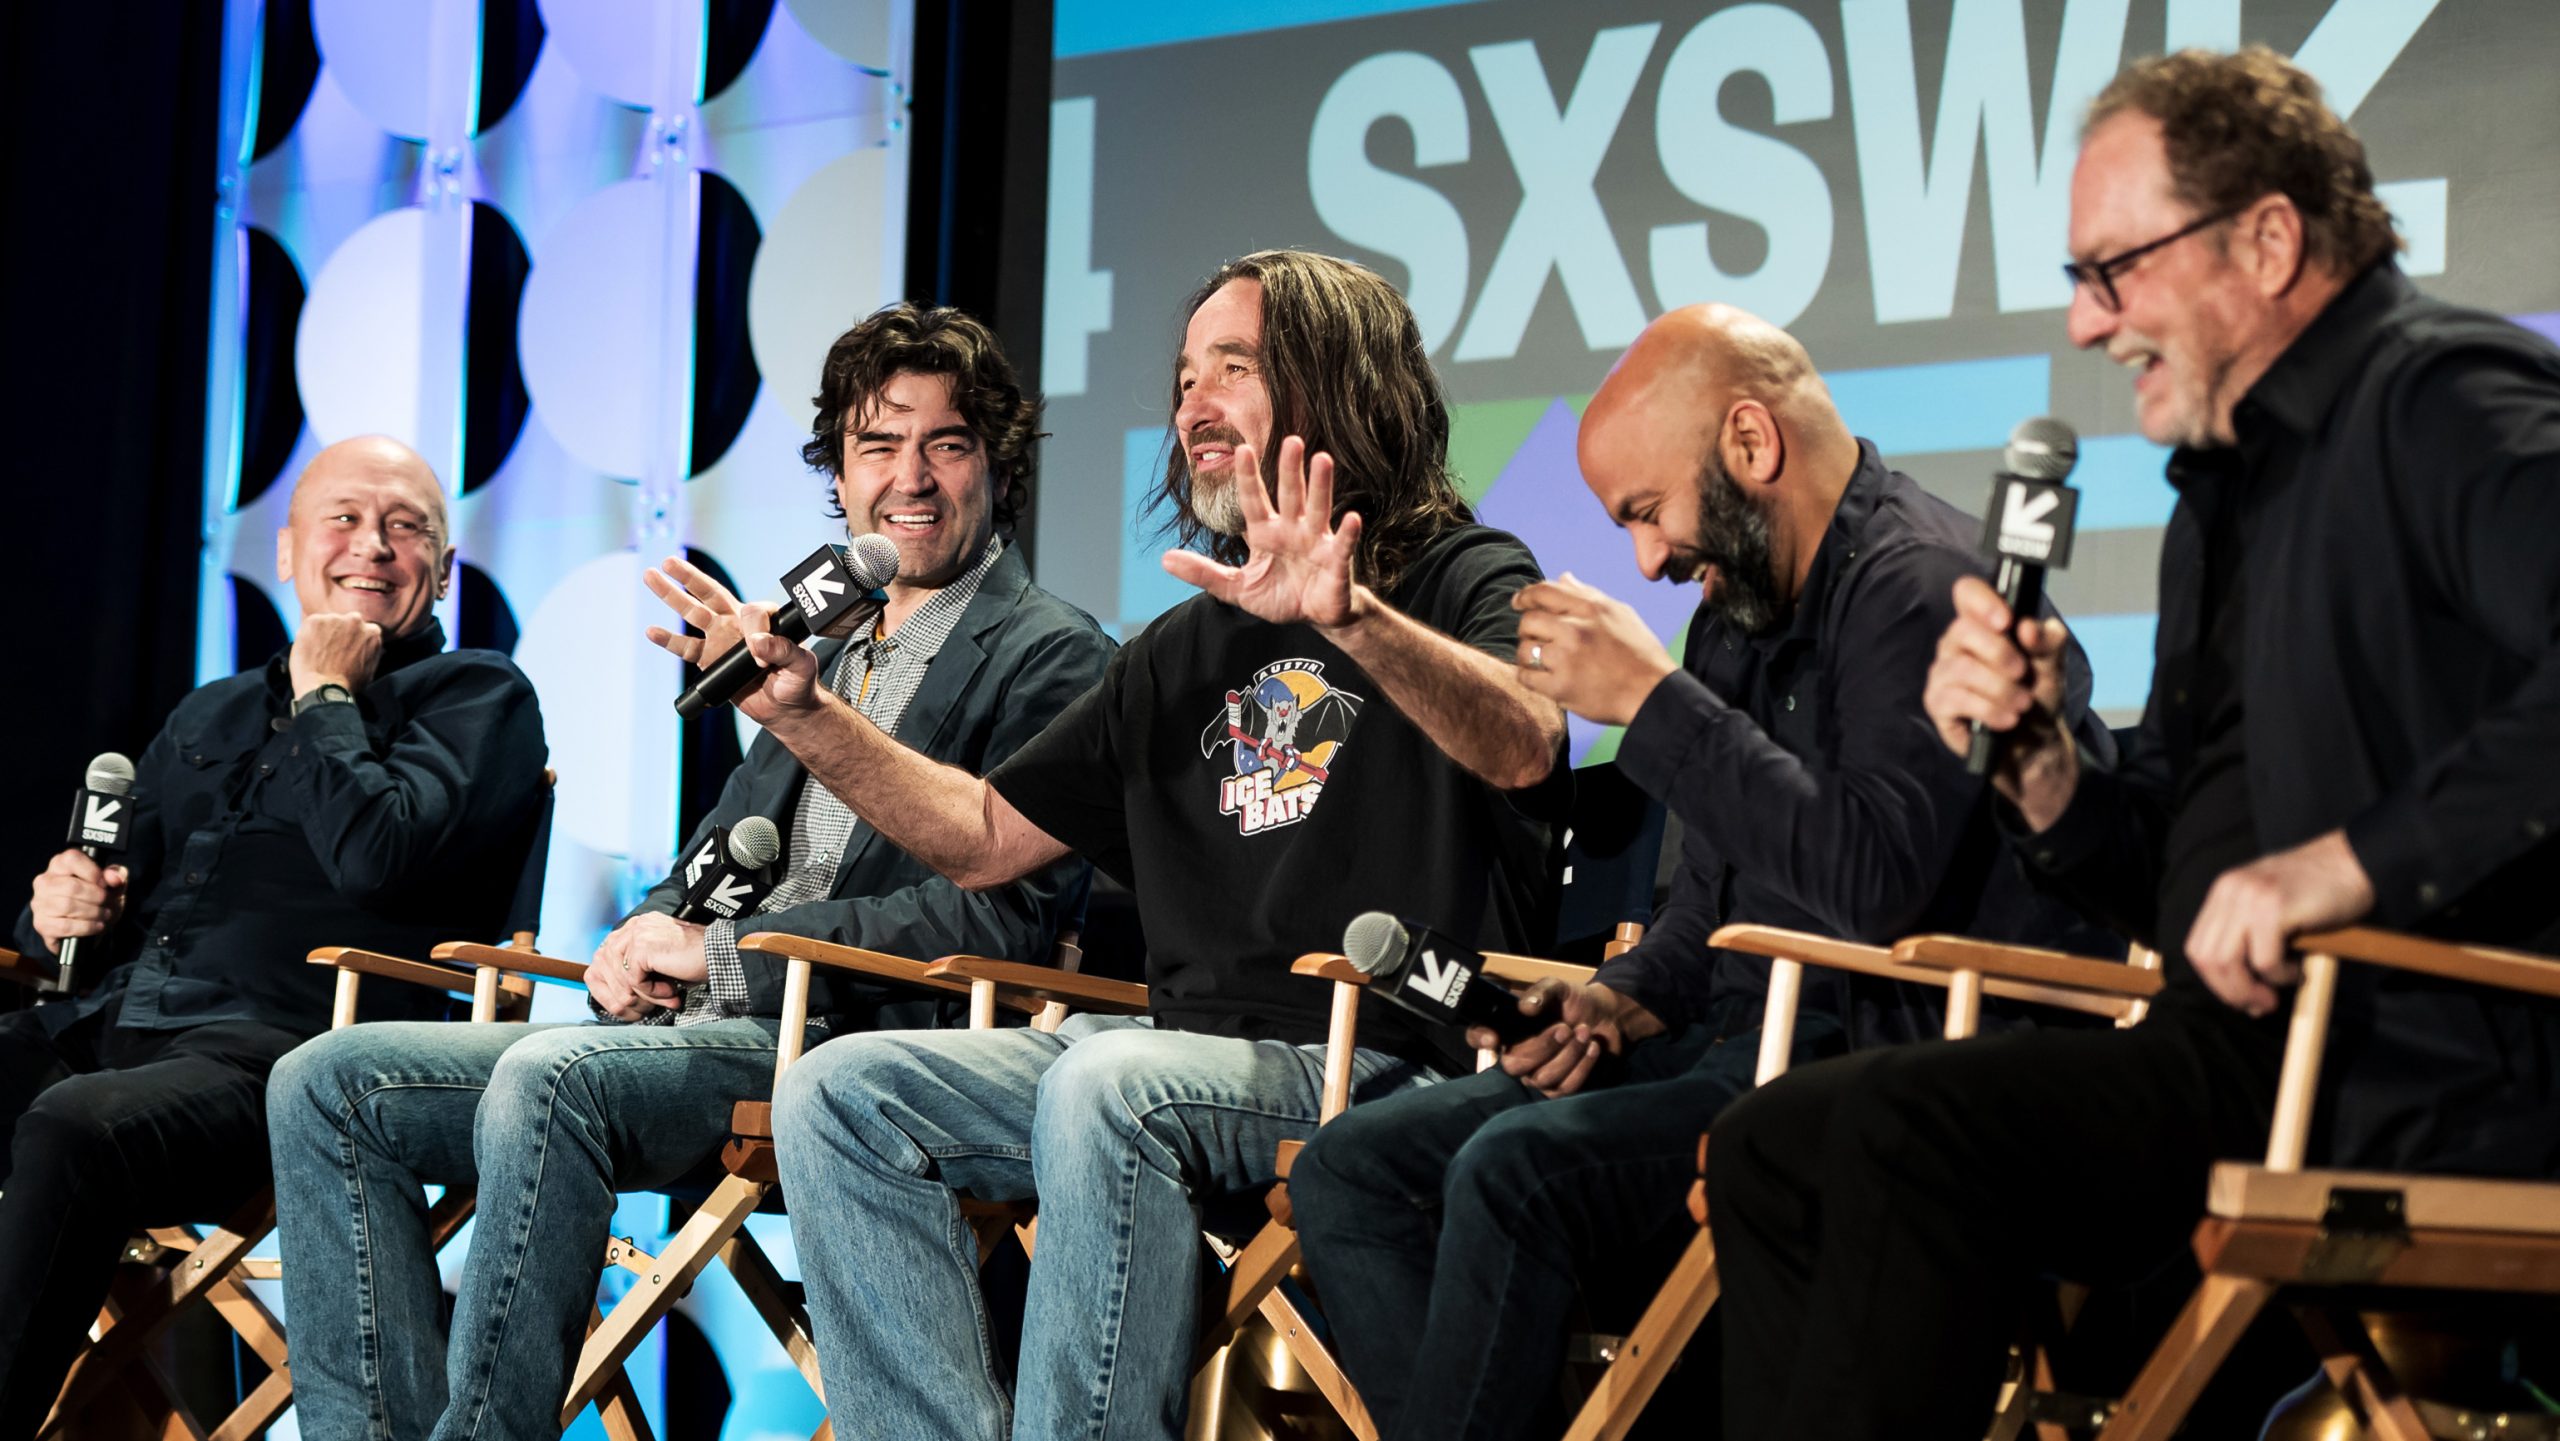 Celebrating 25 Years of 'Office Space' with Mike Judge and Cast – Photo by Shannon Johnston